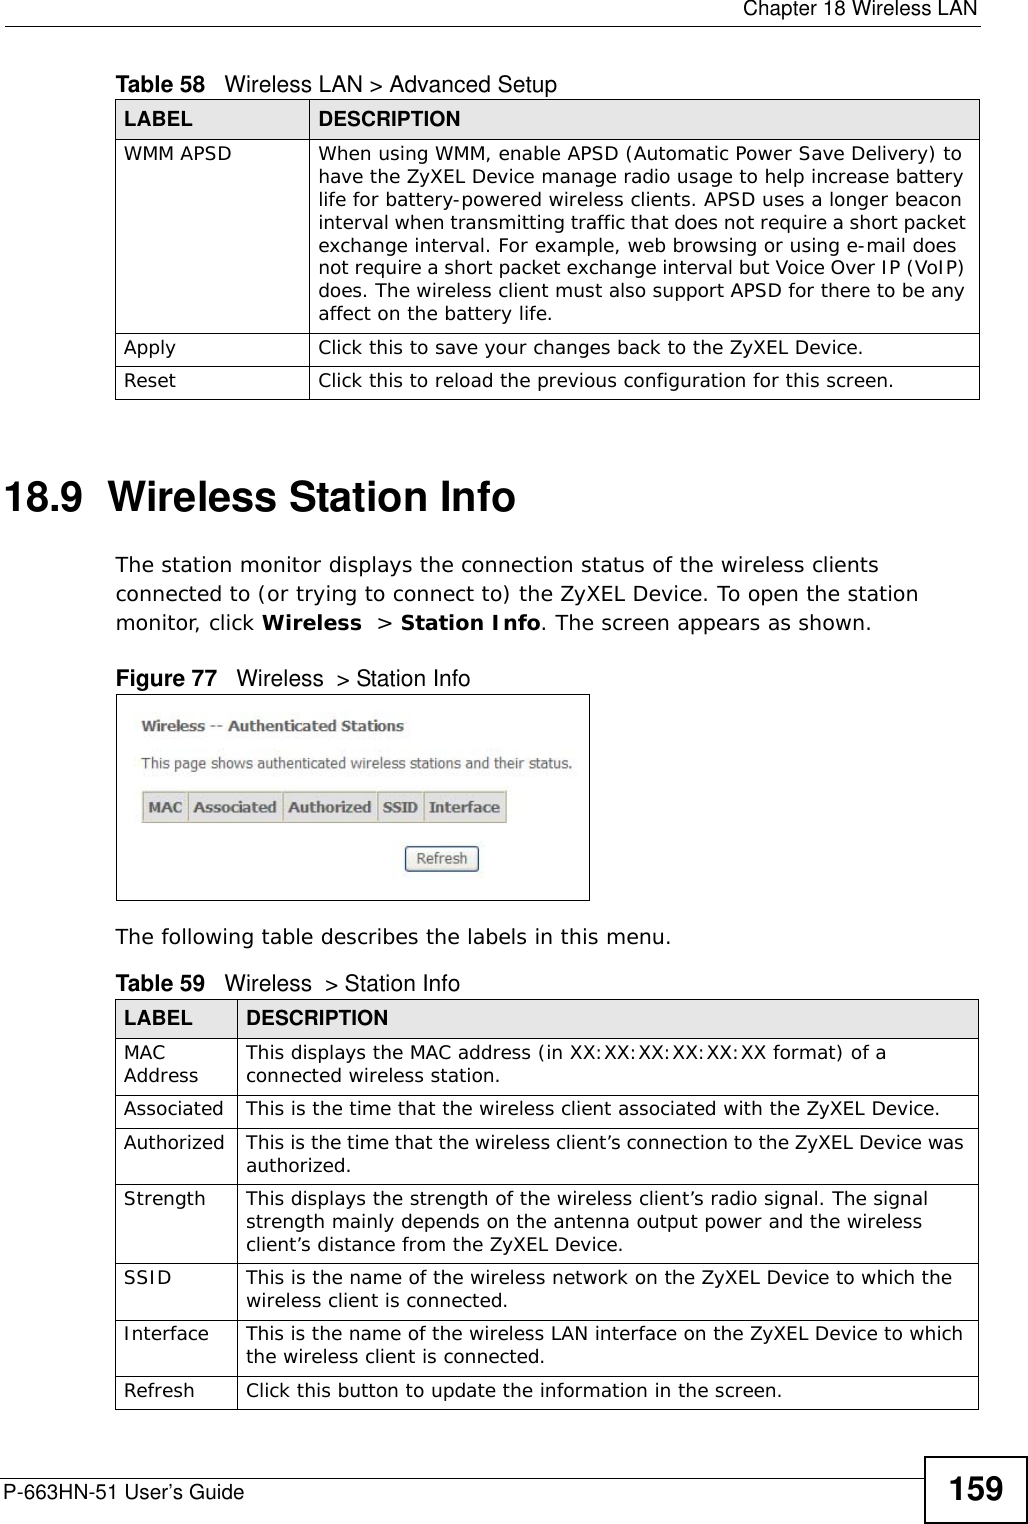  Chapter 18 Wireless LANP-663HN-51 User’s Guide 15918.9  Wireless Station InfoThe station monitor displays the connection status of the wireless clients connected to (or trying to connect to) the ZyXEL Device. To open the station monitor, click Wireless  &gt; Station Info. The screen appears as shown.Figure 77   Wireless  &gt; Station InfoThe following table describes the labels in this menu.WMM APSD When using WMM, enable APSD (Automatic Power Save Delivery) to have the ZyXEL Device manage radio usage to help increase battery life for battery-powered wireless clients. APSD uses a longer beacon interval when transmitting traffic that does not require a short packet exchange interval. For example, web browsing or using e-mail does not require a short packet exchange interval but Voice Over IP (VoIP) does. The wireless client must also support APSD for there to be any affect on the battery life. Apply Click this to save your changes back to the ZyXEL Device.Reset Click this to reload the previous configuration for this screen.Table 58   Wireless LAN &gt; Advanced SetupLABEL DESCRIPTIONTable 59   Wireless  &gt; Station InfoLABEL DESCRIPTIONMAC Address This displays the MAC address (in XX:XX:XX:XX:XX:XX format) of a connected wireless station. Associated This is the time that the wireless client associated with the ZyXEL Device.Authorized This is the time that the wireless client’s connection to the ZyXEL Device was authorized.Strength This displays the strength of the wireless client’s radio signal. The signal strength mainly depends on the antenna output power and the wireless client’s distance from the ZyXEL Device. SSID This is the name of the wireless network on the ZyXEL Device to which the wireless client is connected.Interface This is the name of the wireless LAN interface on the ZyXEL Device to which the wireless client is connected.Refresh Click this button to update the information in the screen.